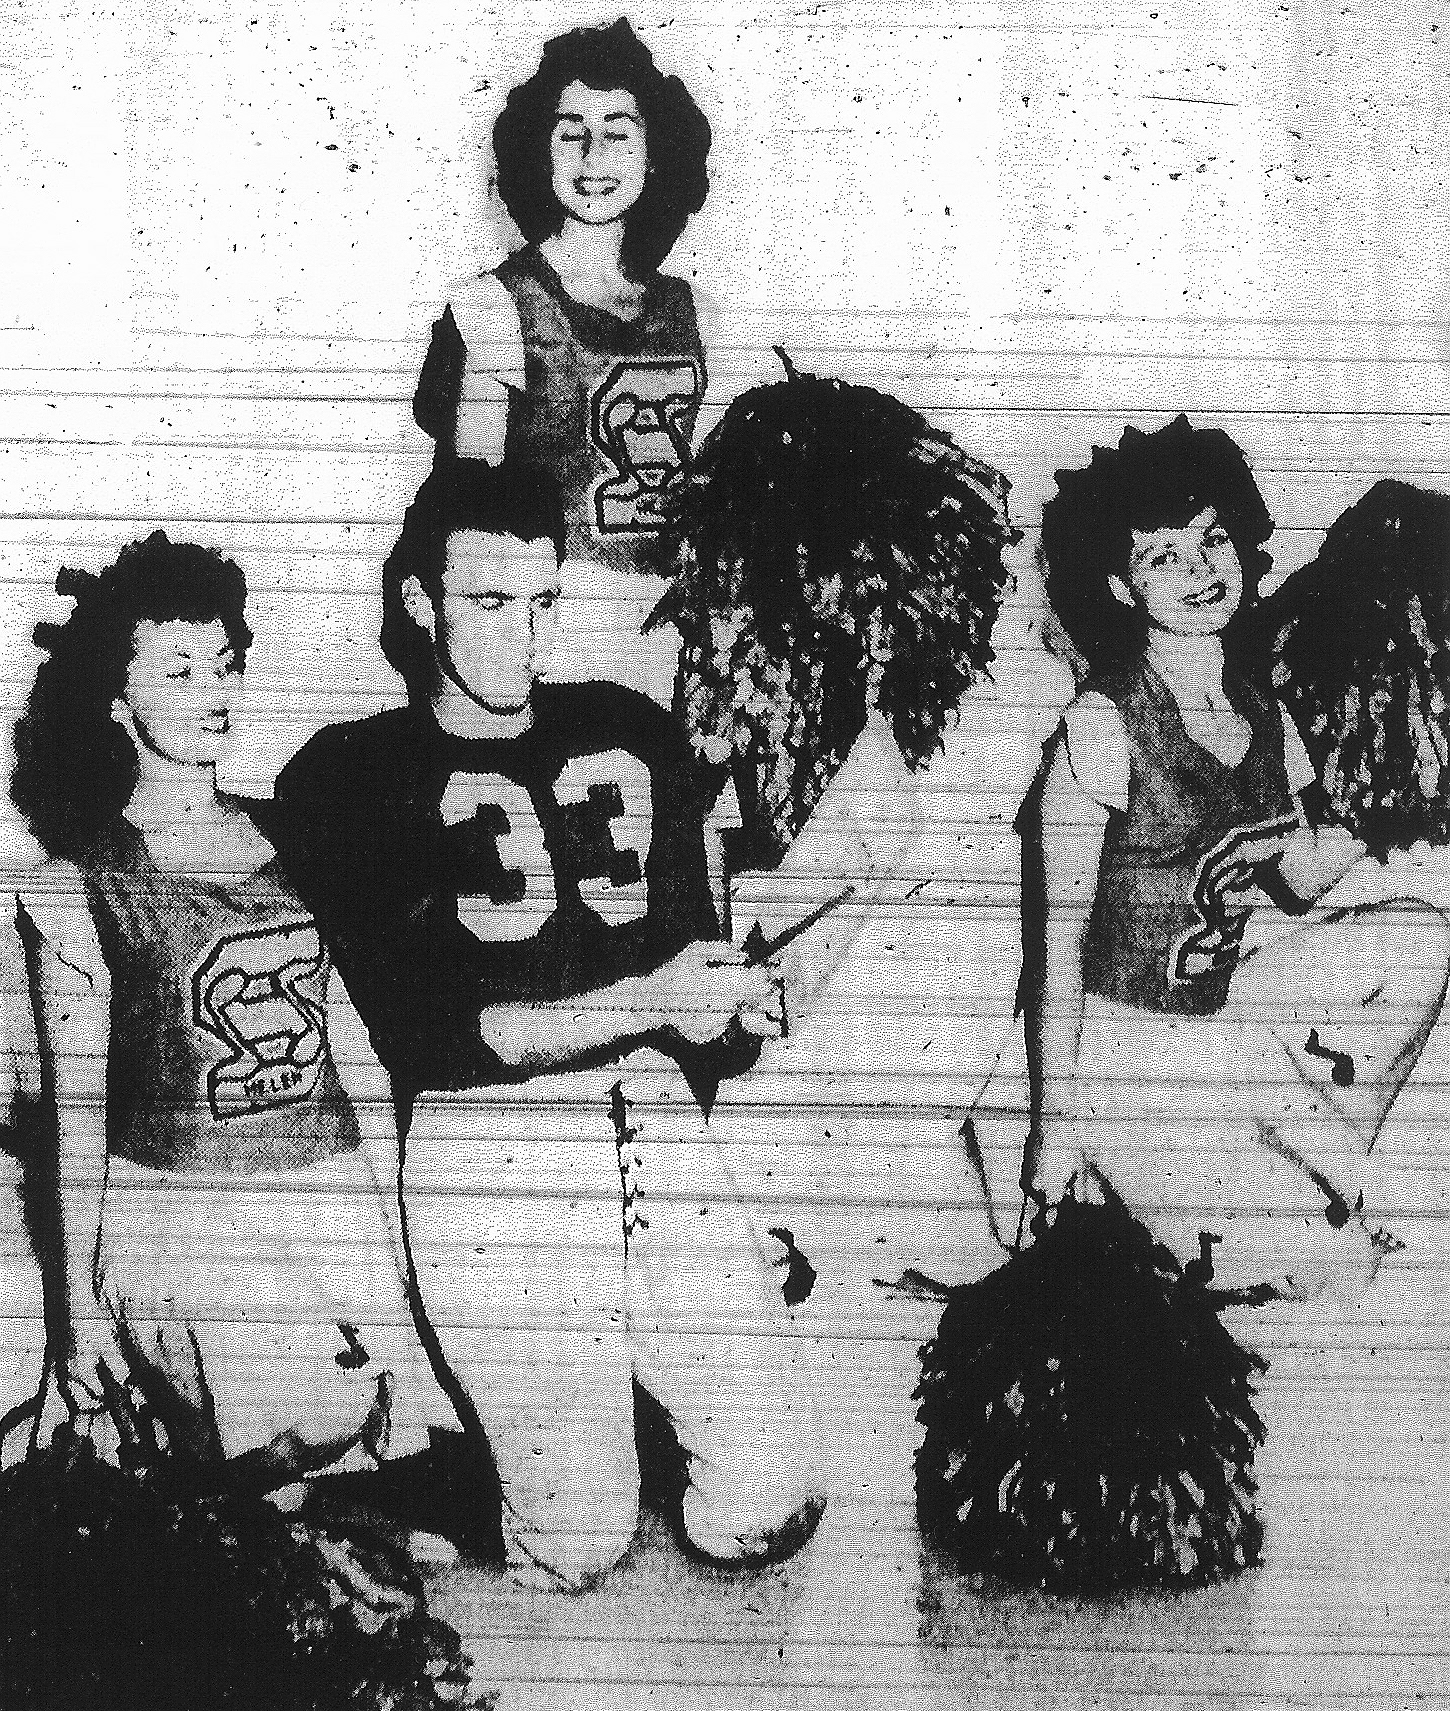 Sweetwater team captain Lyle Newport has attention of cheerleaders Helen Powell, inez Horowitz, and Betty Vincent (from left) as he diagrams a play Red Devils hoped to use in rivalry game with Grossmont. 